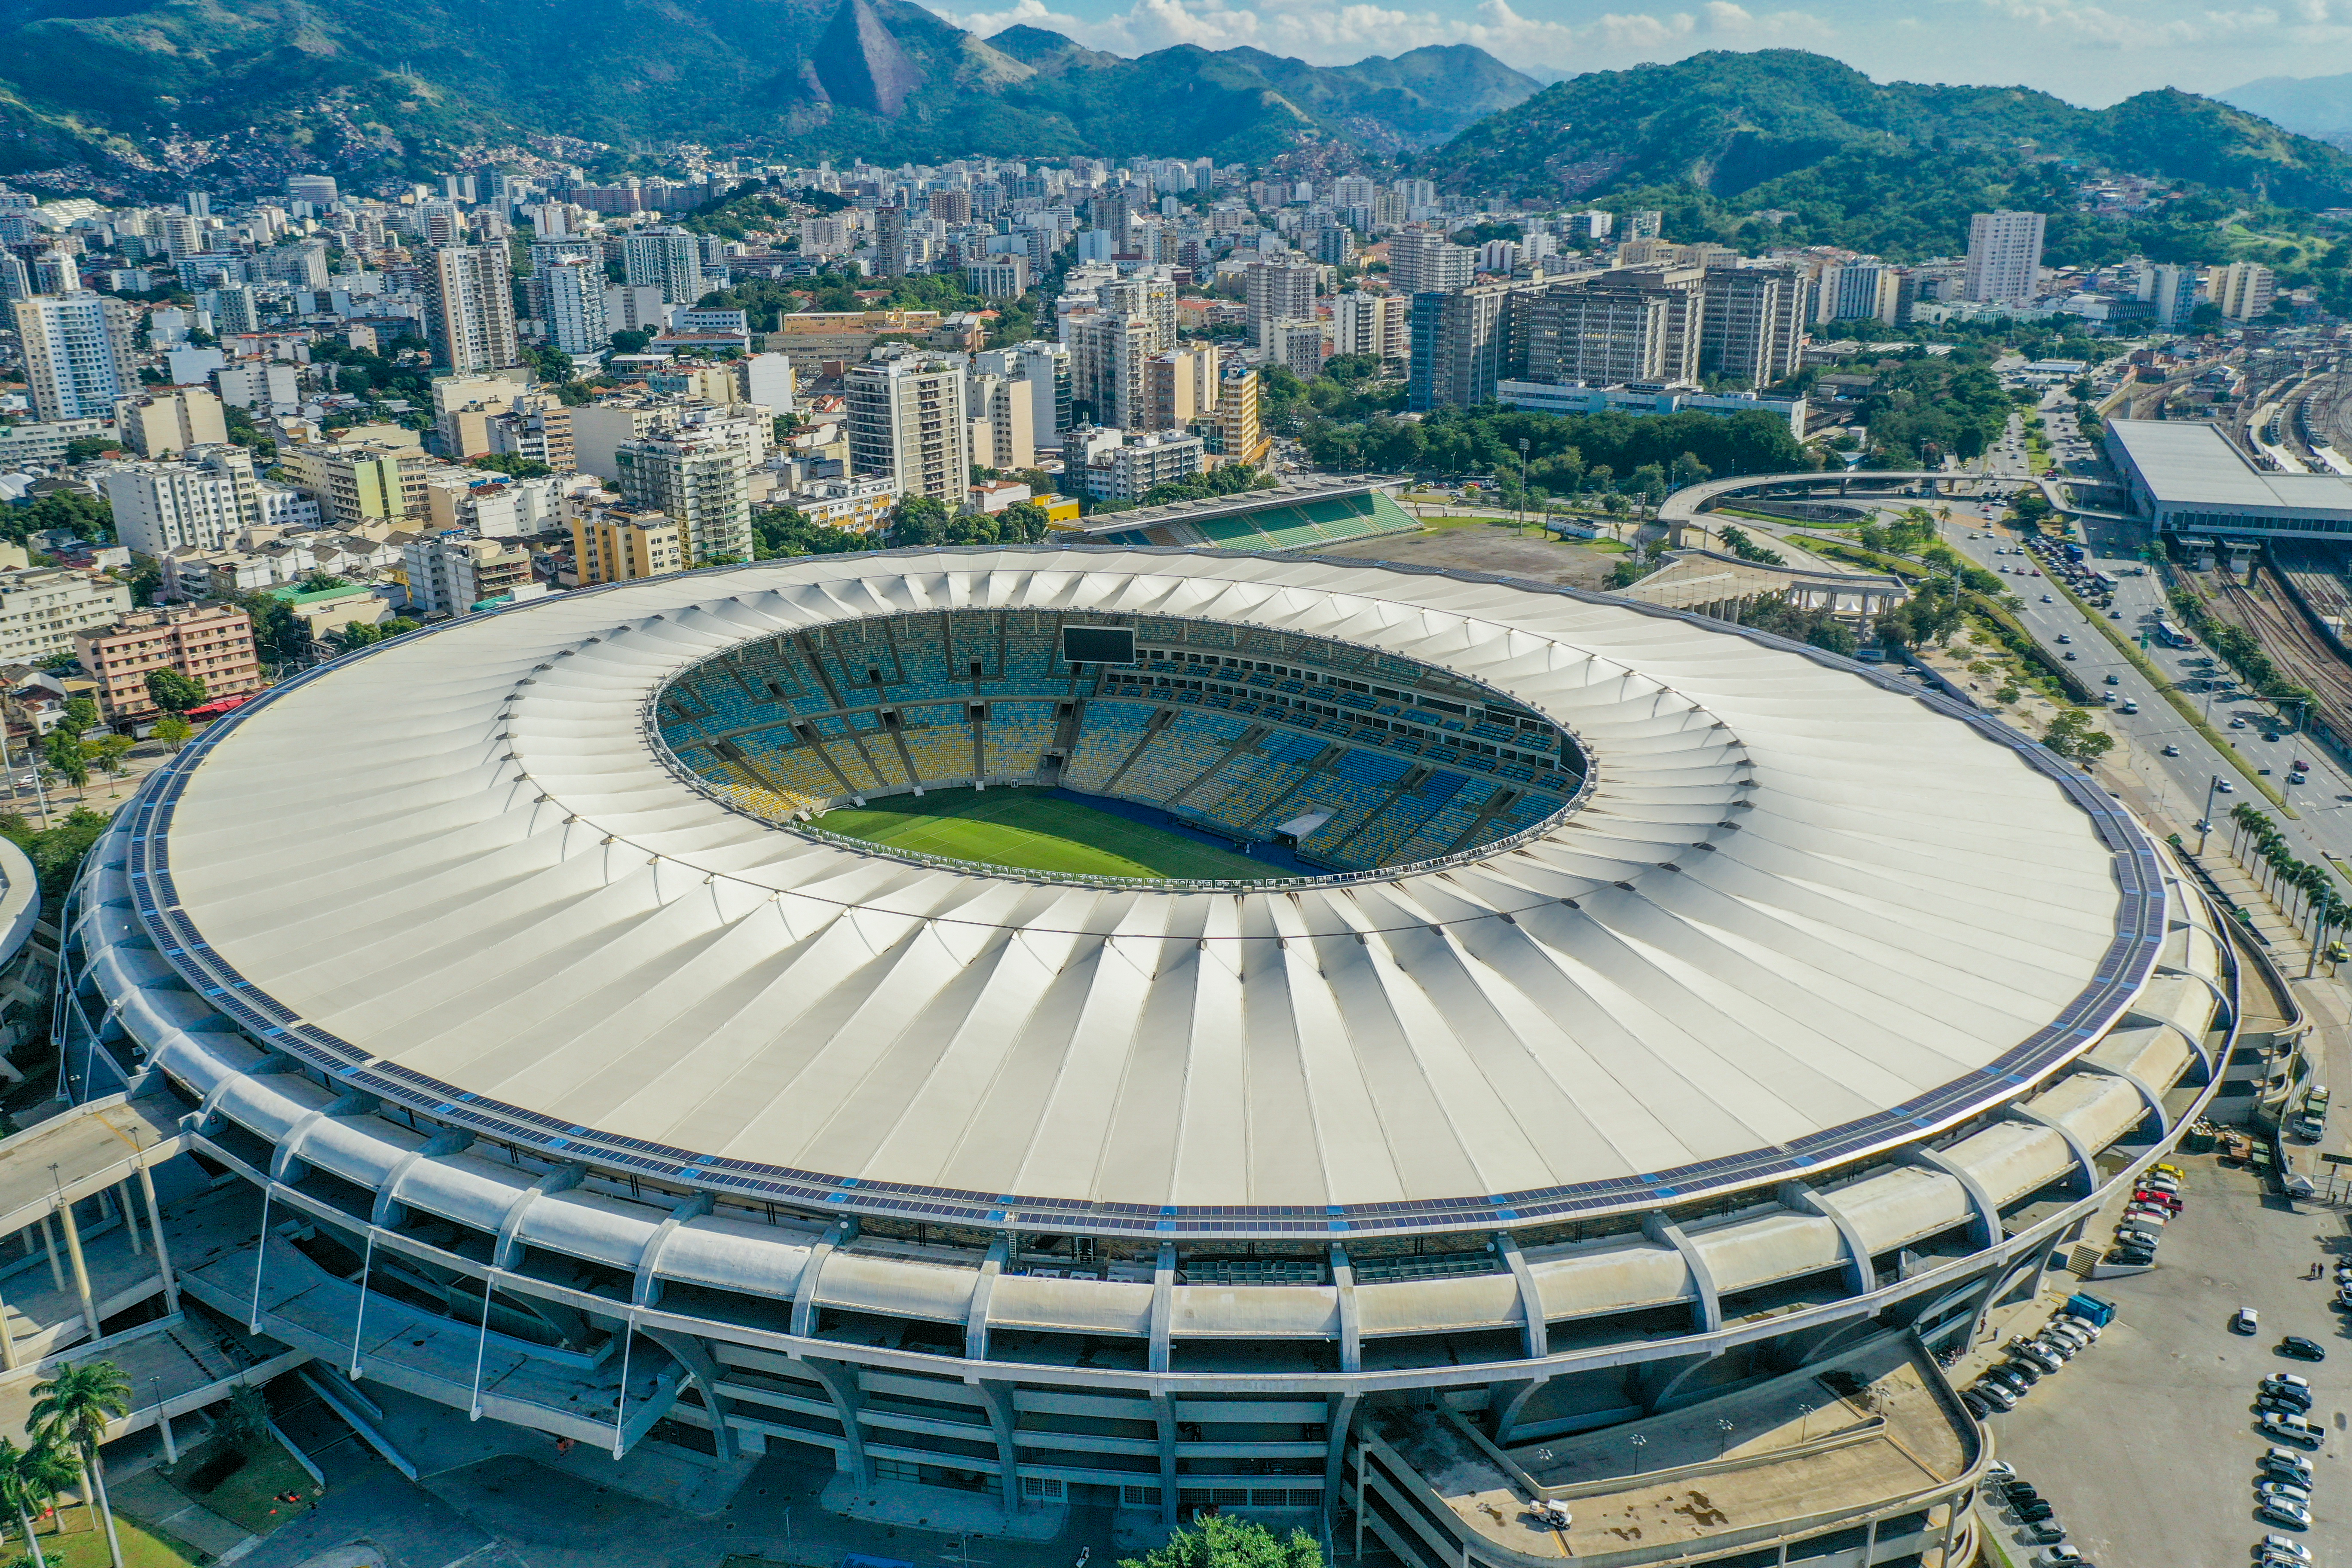 Aerial view of Maracanã stadium. The partially-covered stadium is circular, with a circular gap in the roof directly above the pitch. Behind the stadium sprawls the city of Rio, with many high-rise buildings visible. Rocky, forested mountains are visible in the background.